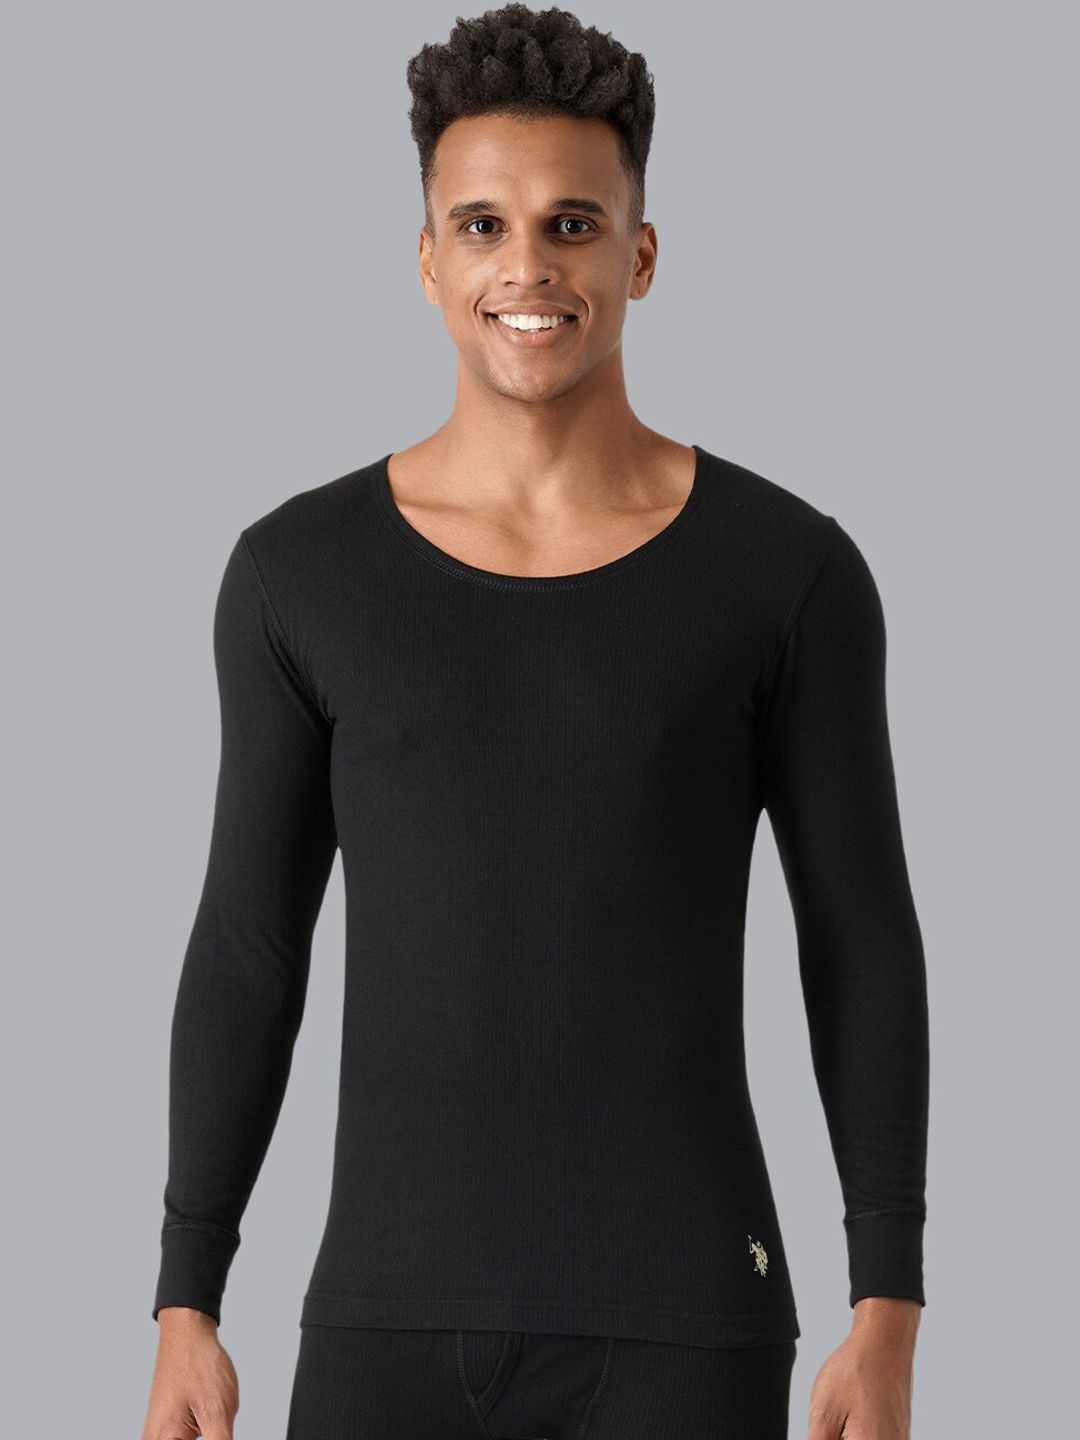 U.S. Polo Assn. Men Black Solid Cotton Thermal Tops Price in India